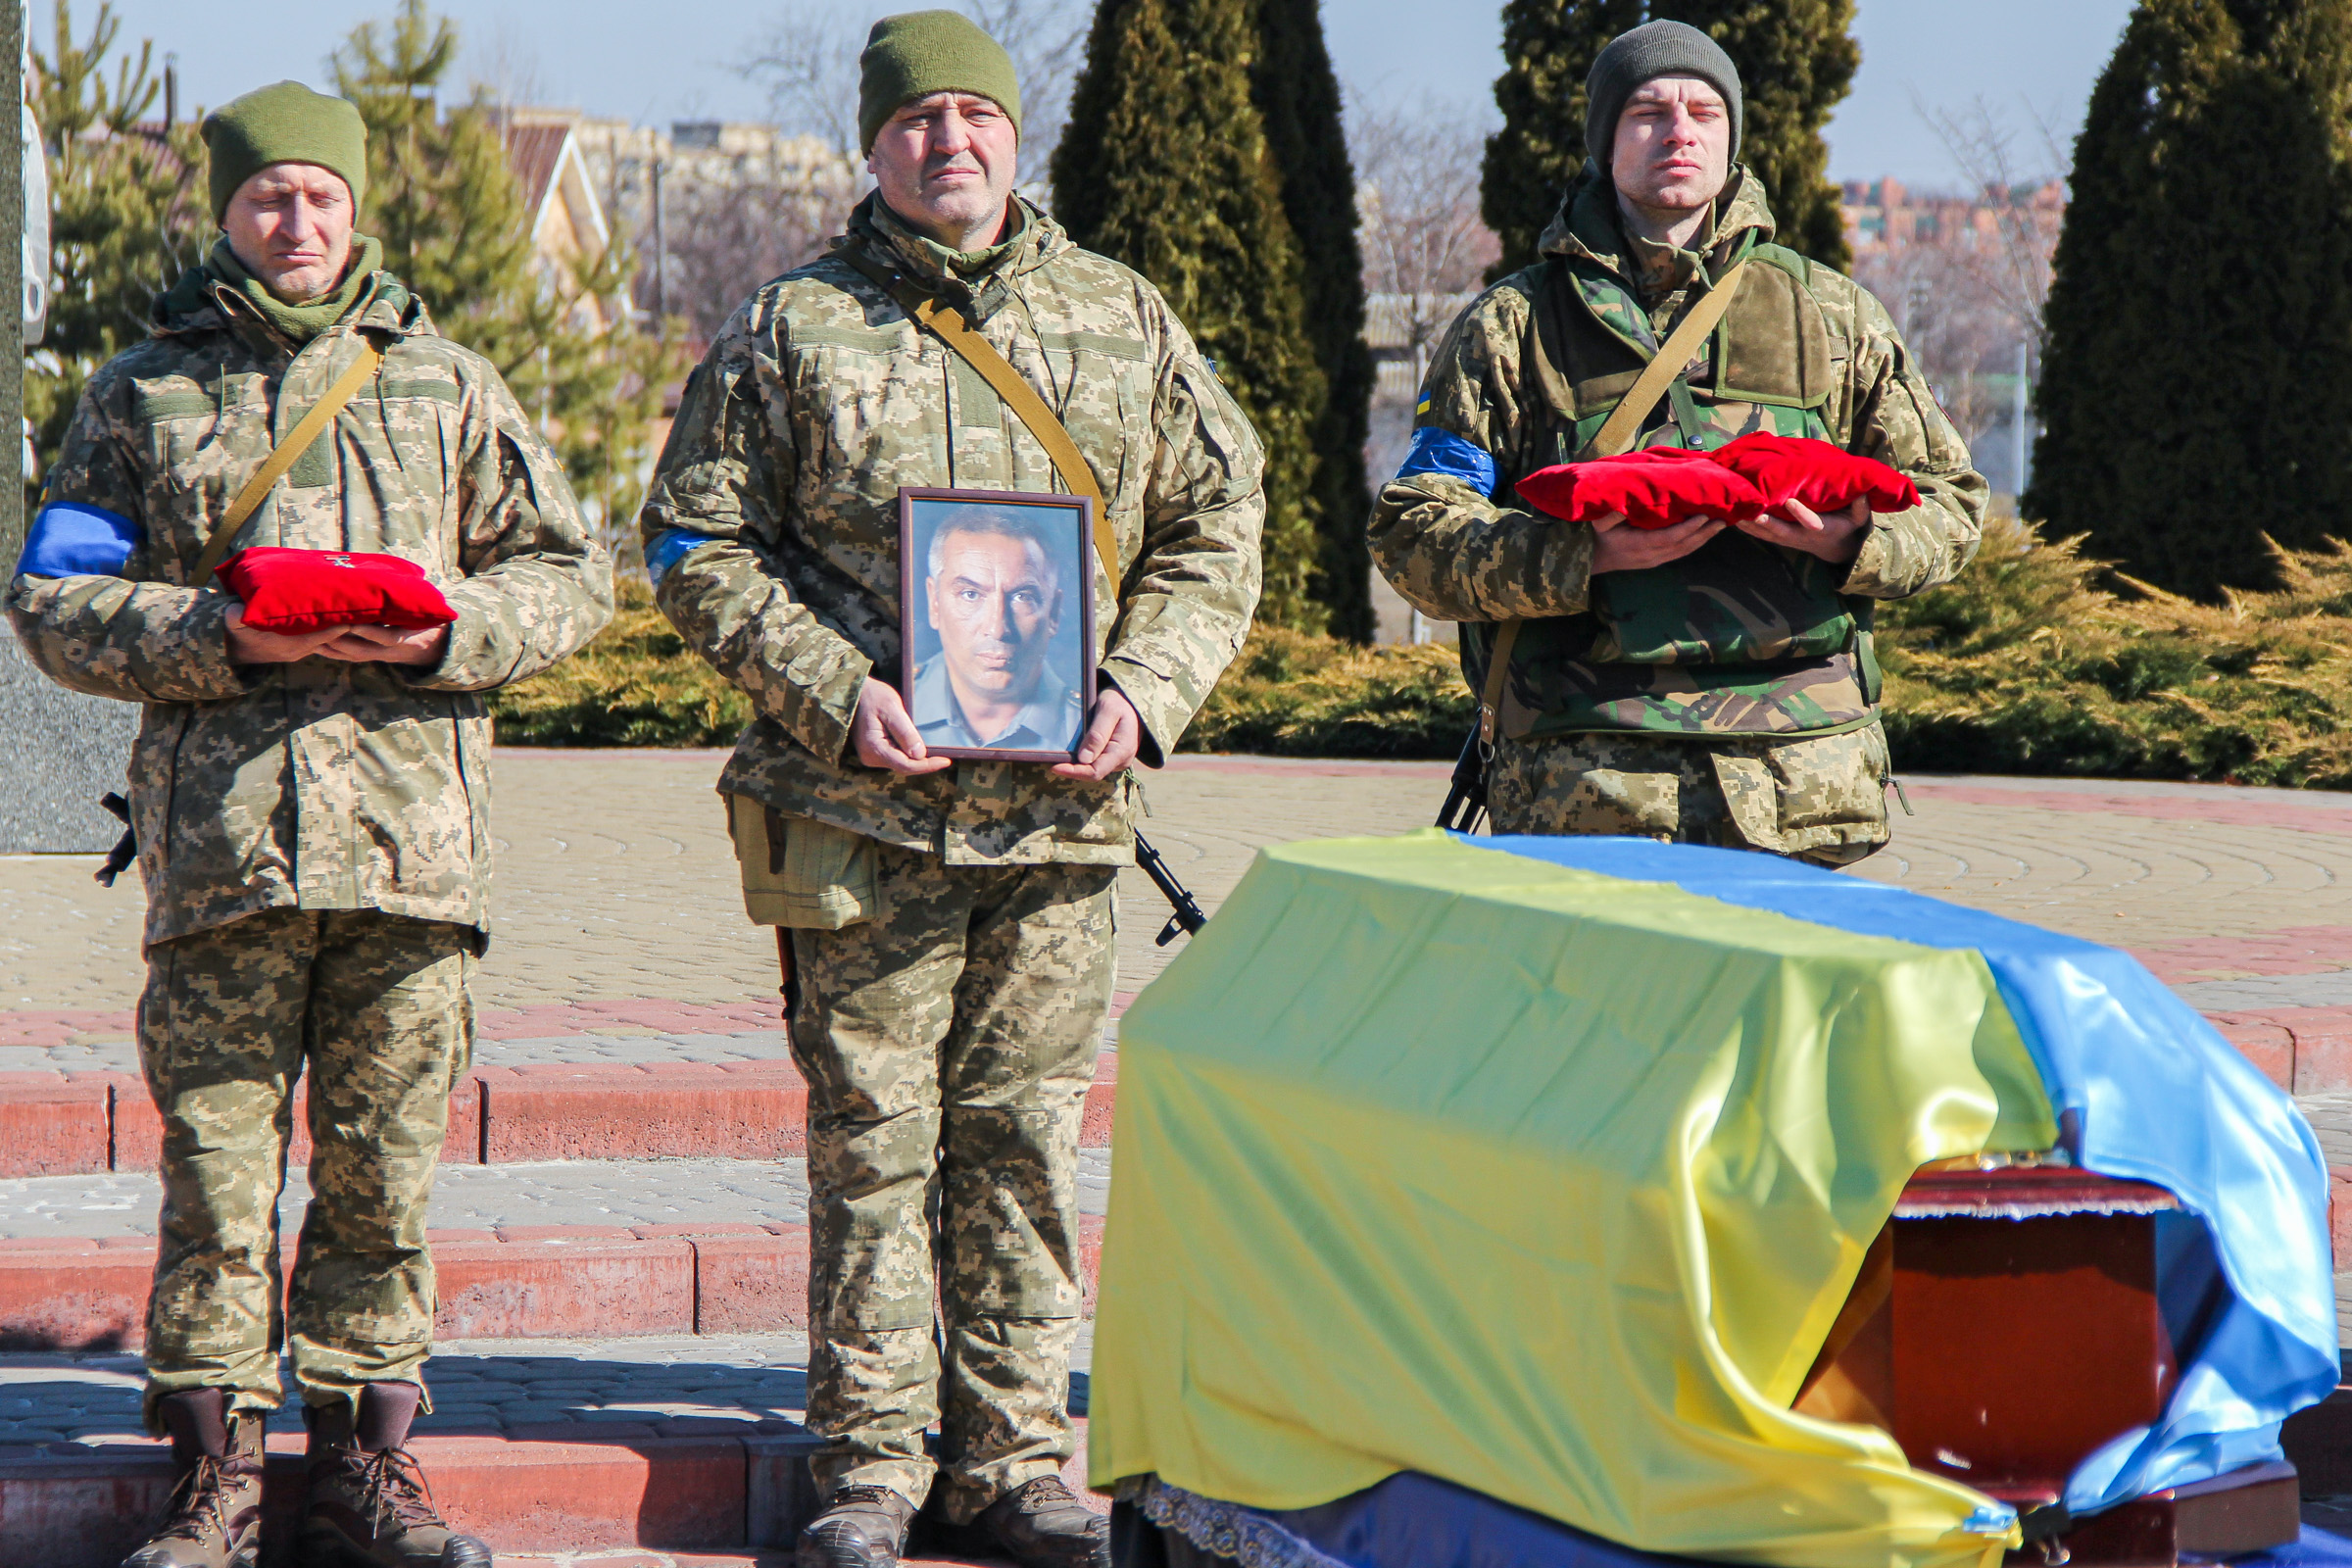 Family and fellow soldiers bid farewell to heroic colonel Gudz killed in Donbas